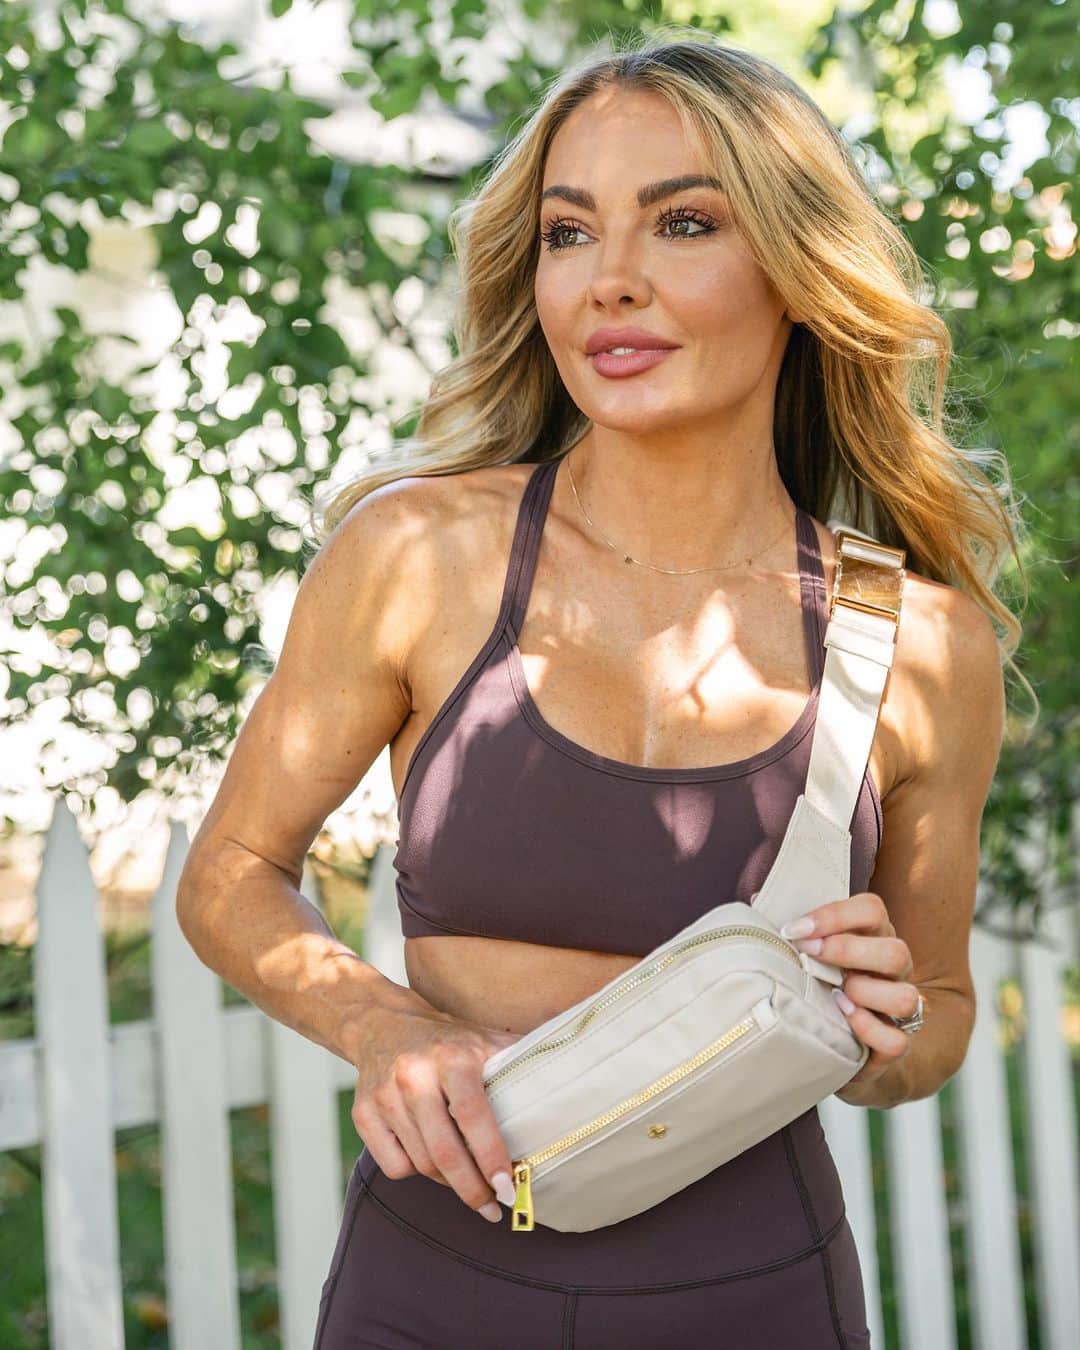 BROOKE EVERSのインスタグラム：「Happy Monday (well here in US) everyone! Let's hit the ground running with an epic week! I don't know about you but when i'm on the run with or without my toddler I need my hands freeeeeee..... that's why I always grab a handbag like this @petaandjain "Madix" belt bag. Just swing over the shoulder and LEGGO! I have it in black as well as im obsessed. I have a discount code for all my followers BROOKE20 - you need this bag in your life... ✌🏽」